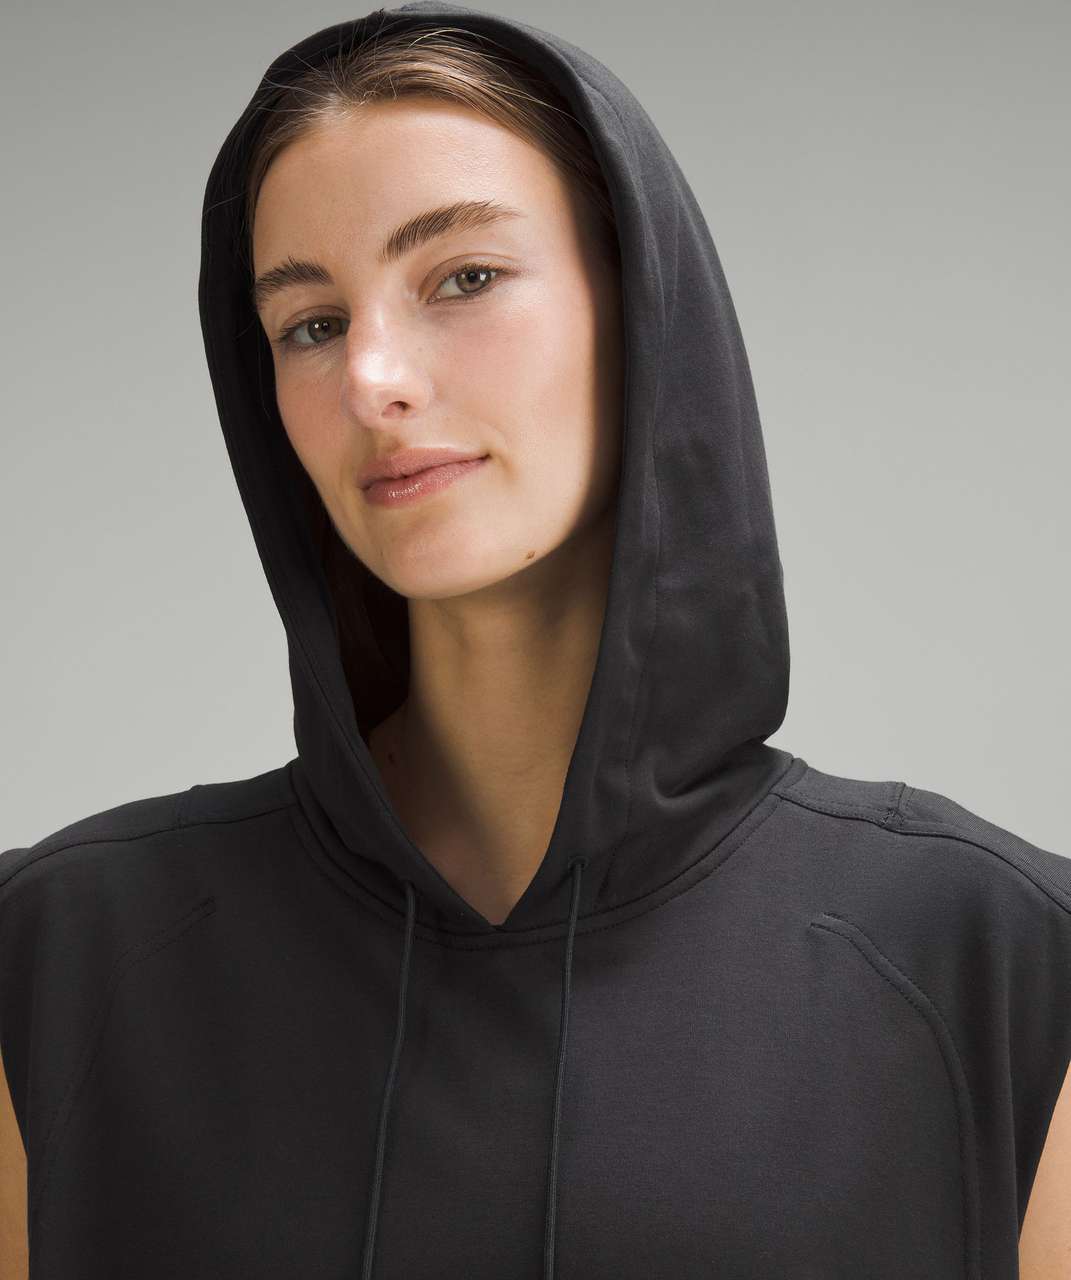 French Terry Sleeveless Pullover Hoodies (3130) 8 Oz - Three Layer